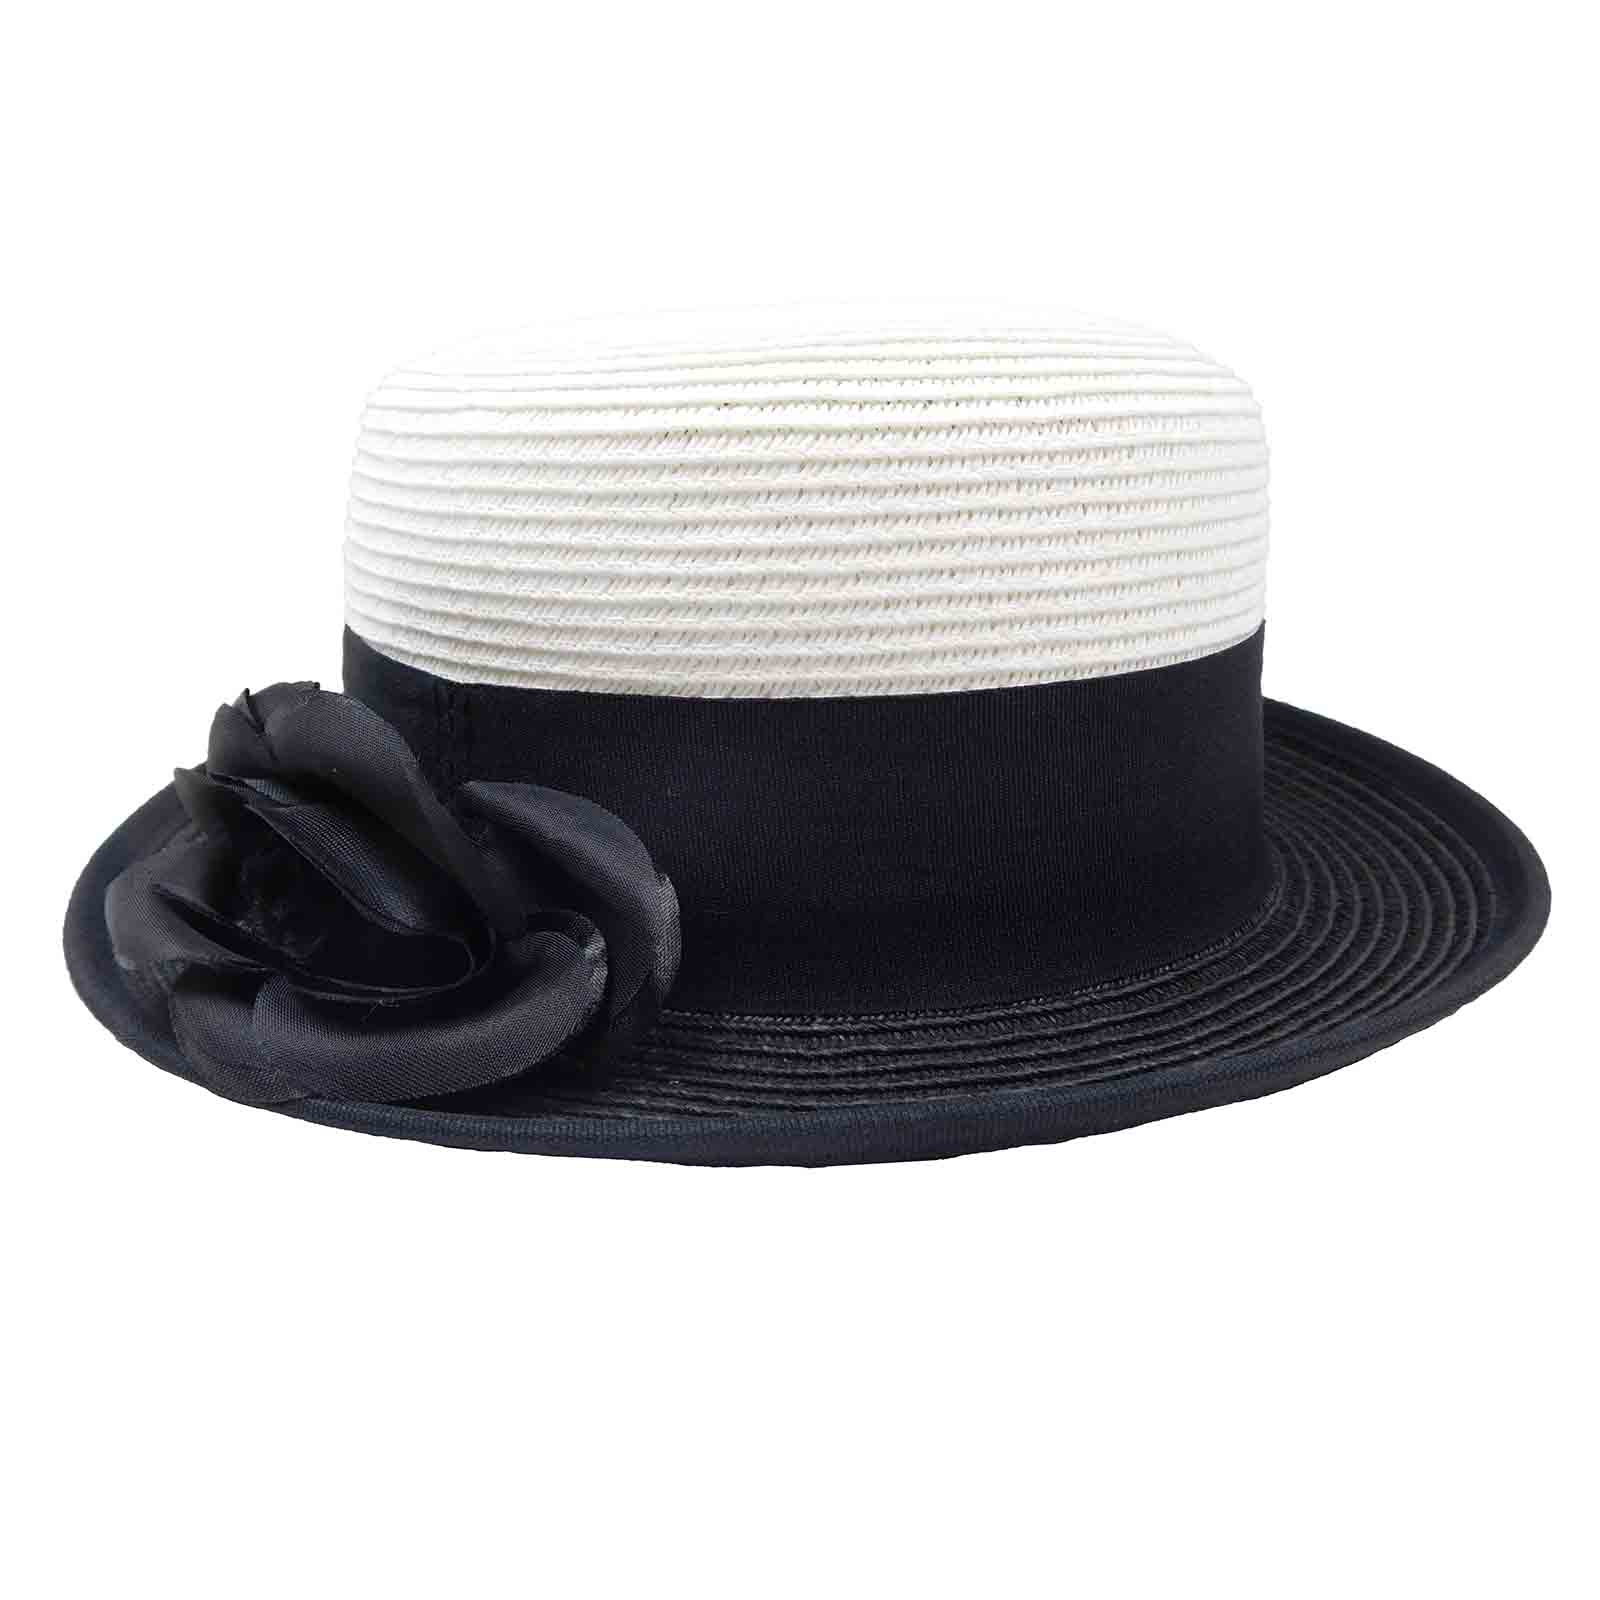 Small Brim Two Tone Boater Hat - Karen Keith Bolero Hat Great hats by Karen Keith BT42wh White  